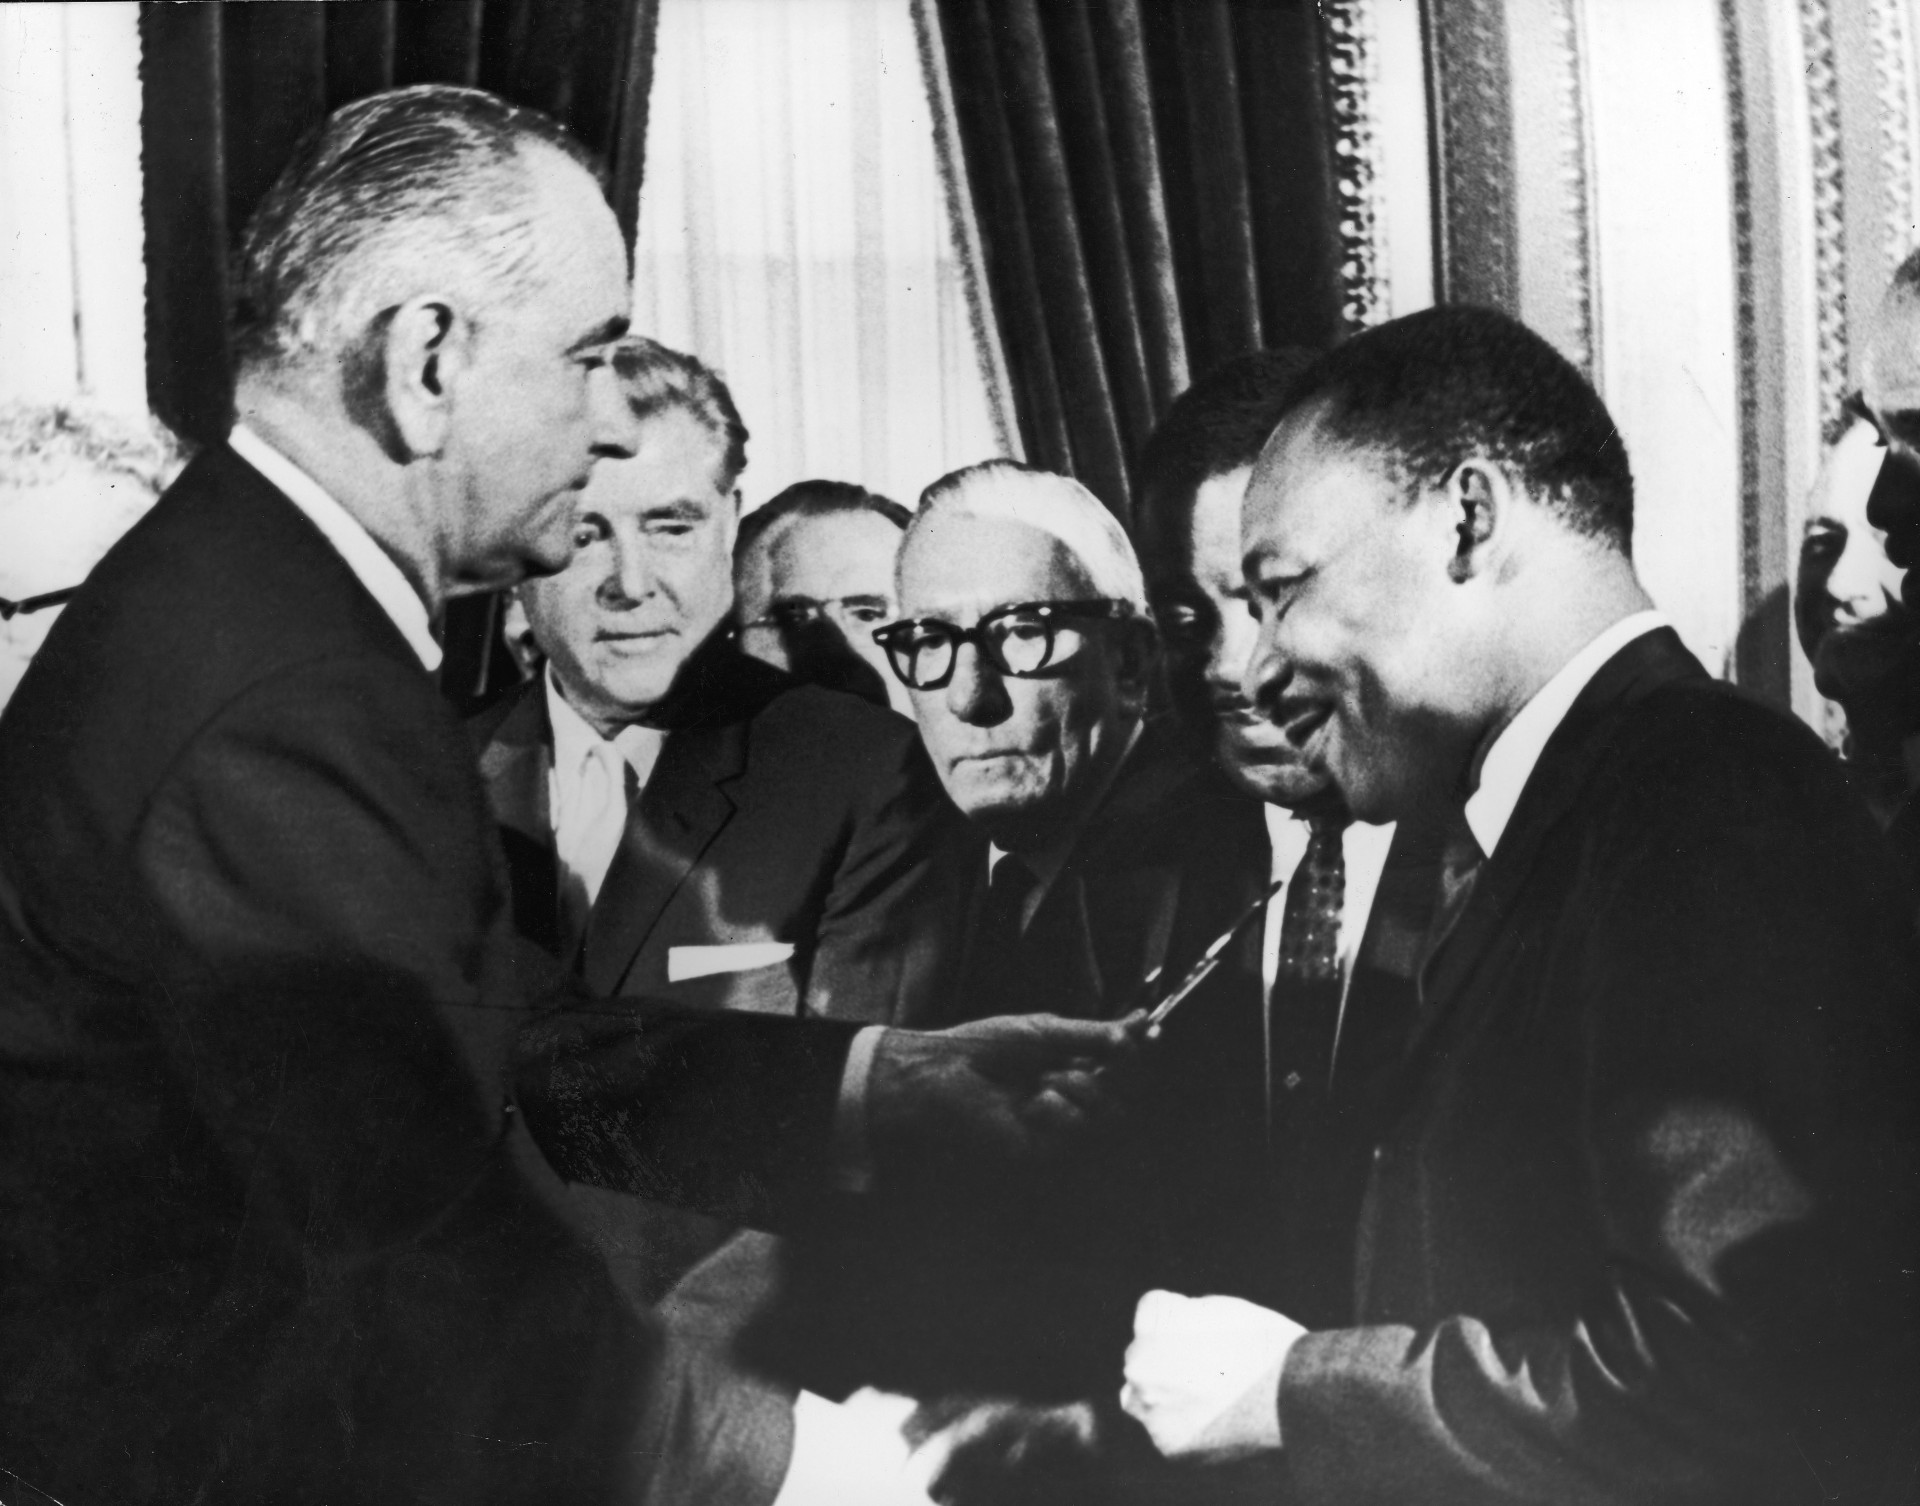 The Civil Rights Act of 1964 was signed into law by President Lyndon B. Johnson at the White House. He is pictured presenting King with the pen used to sign off on the historic document.<p><a href="https://www.msn.com/en-us/community/channel/vid-7xx8mnucu55yw63we9va2gwr7uihbxwc68fxqp25x6tg4ftibpra?cvid=94631541bc0f4f89bfd59158d696ad7e">Follow us and access great exclusive content every day</a></p>